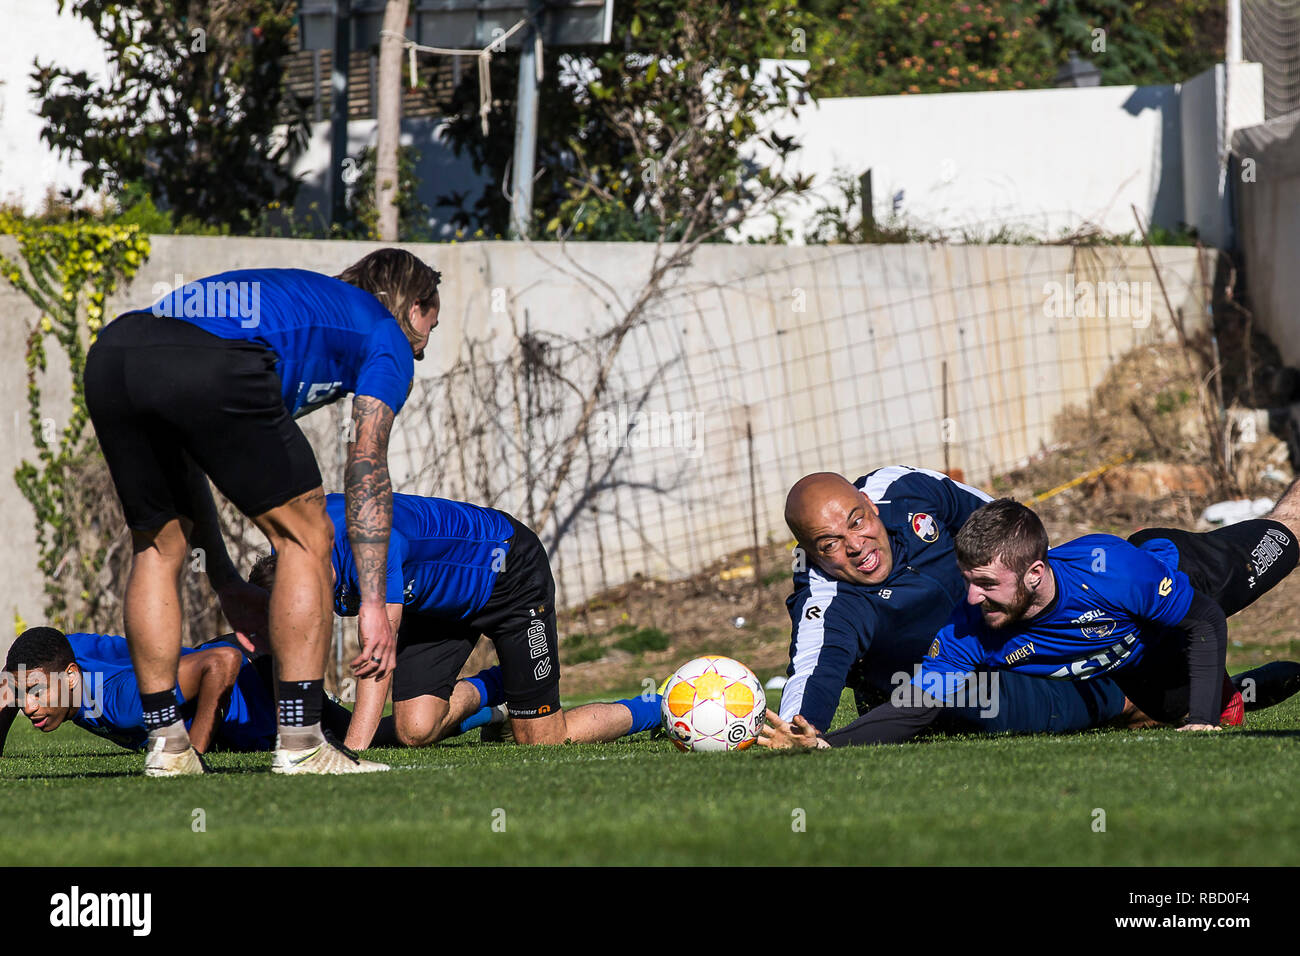 MARBELLA - 09-01-2019,  Dutch football Eredivisie season 2018 / 2019.   Willem II condition trainer Chima Onyeike   and Willem II player Daniel Crowley  during training at Marbella. Stock Photo